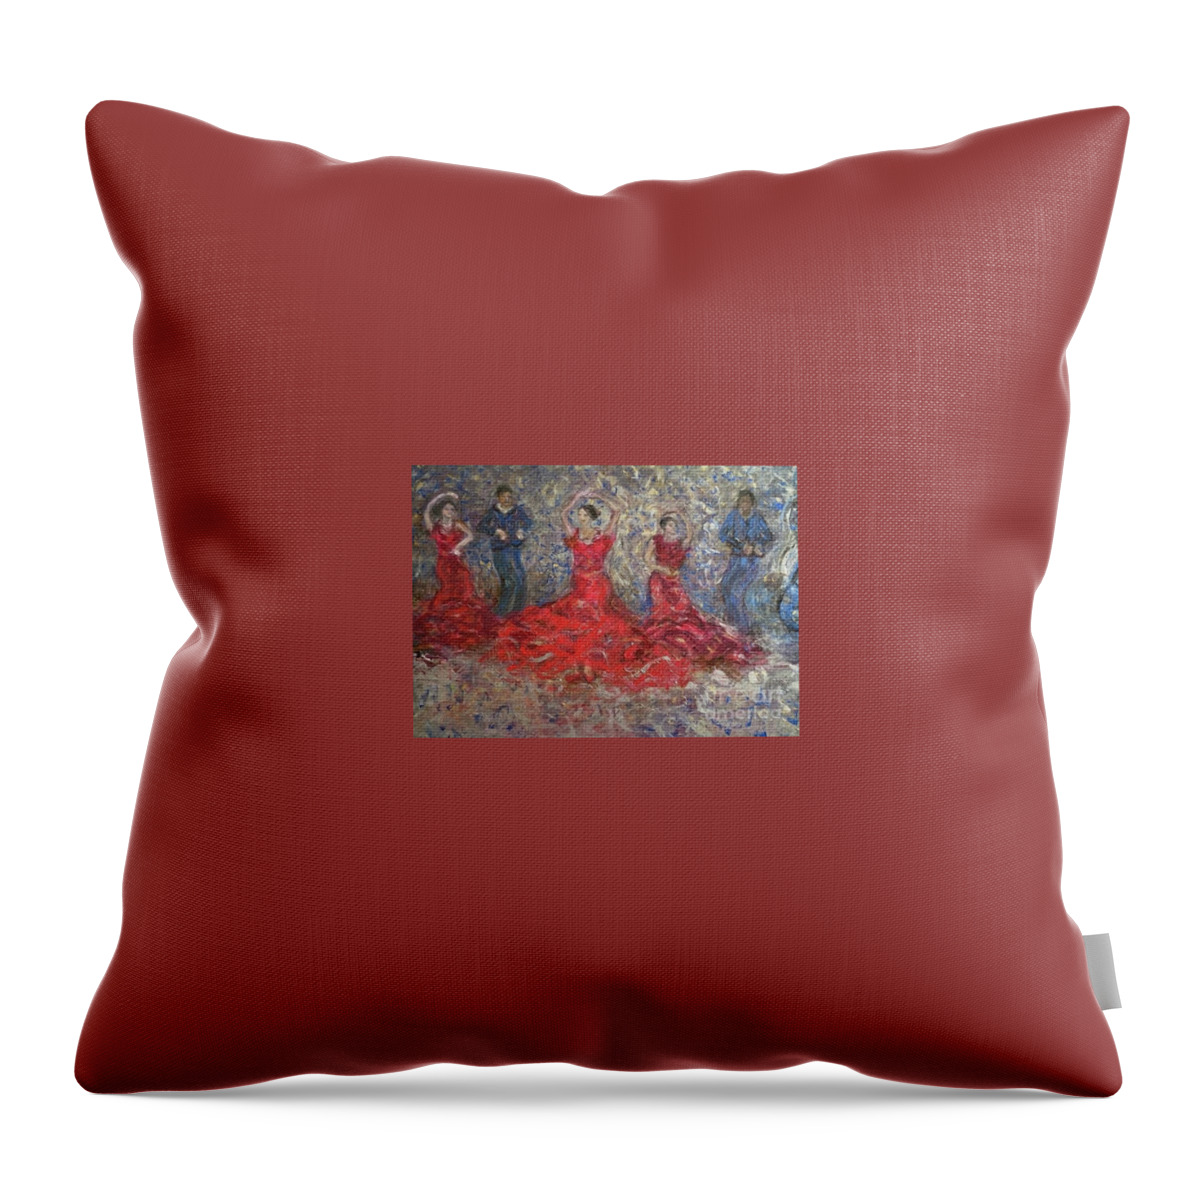 Dancers Throw Pillow featuring the painting Dancers by Fereshteh Stoecklein